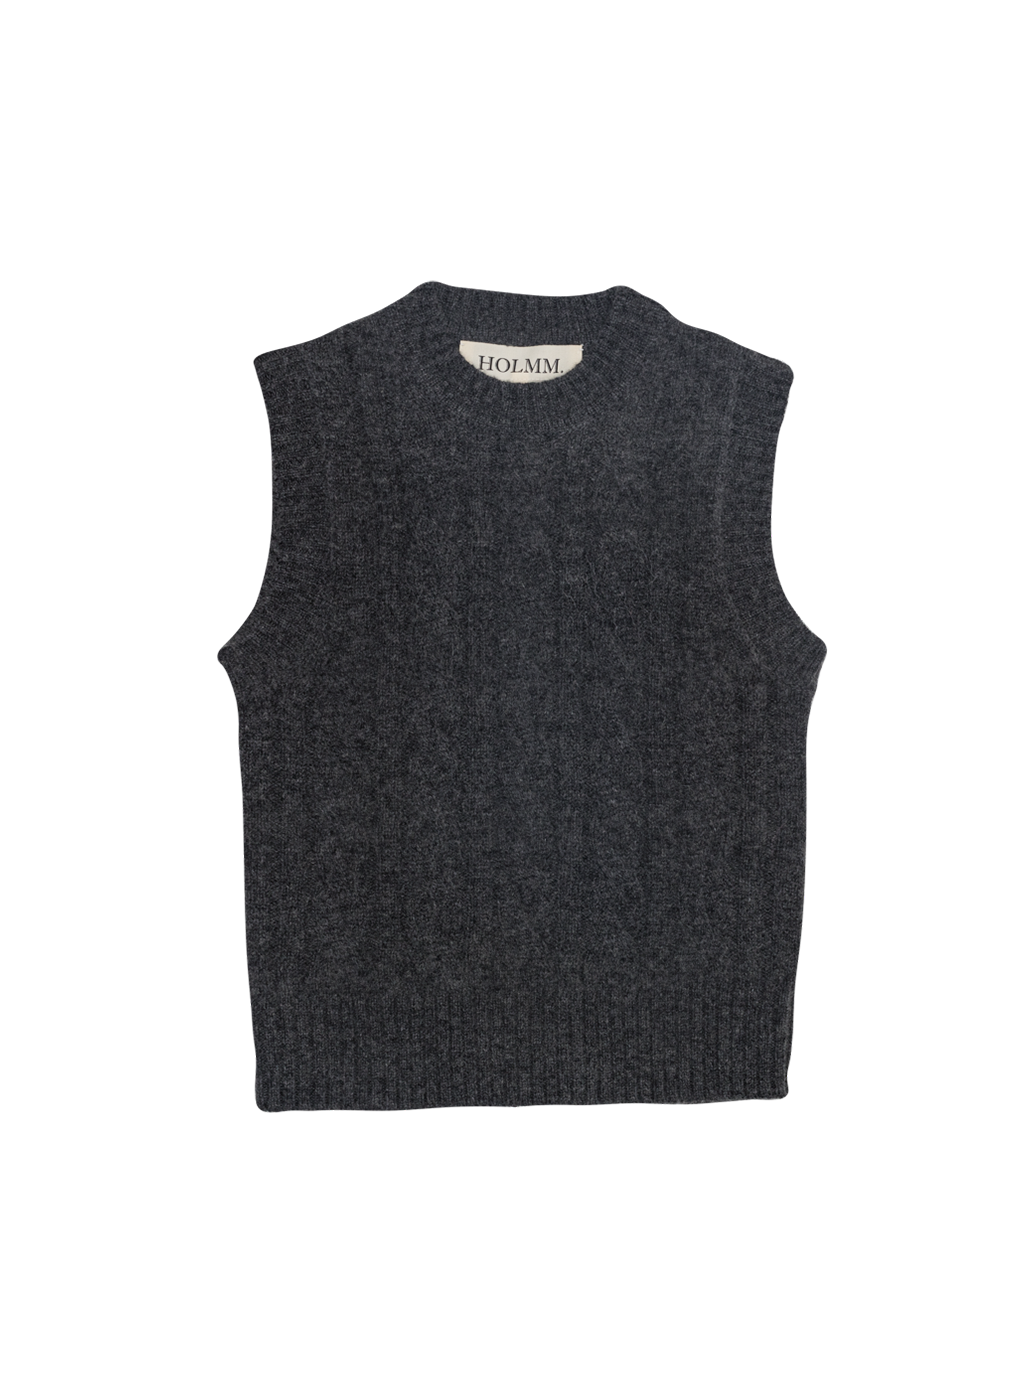 Meri vest made of wool and cashmere blend